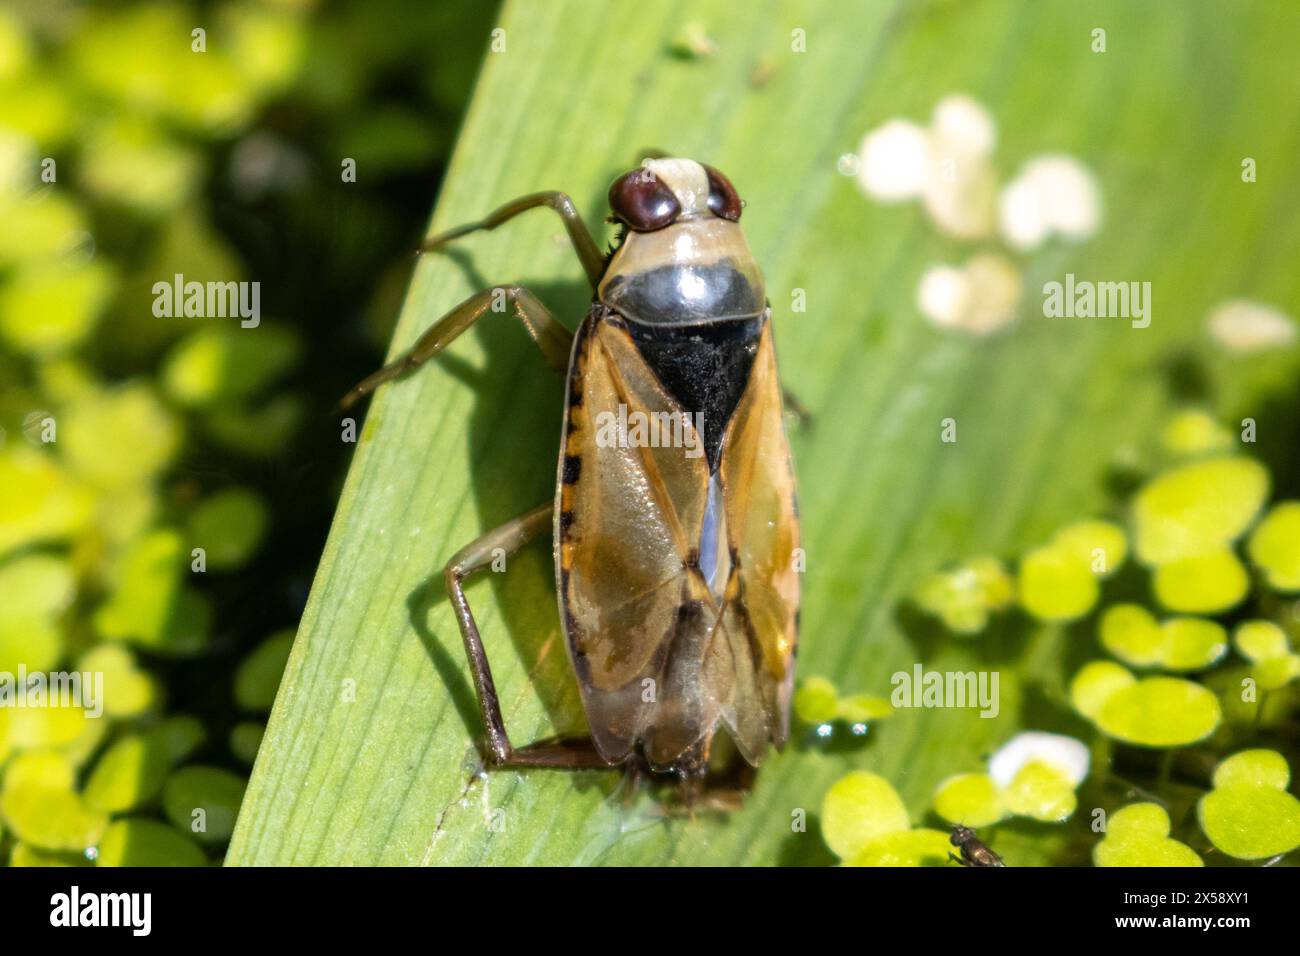 Common backswimmer, Notonecta glauca, aquatic insect found cleaning itself in a garden pond. Sussex, UK Stock Photo